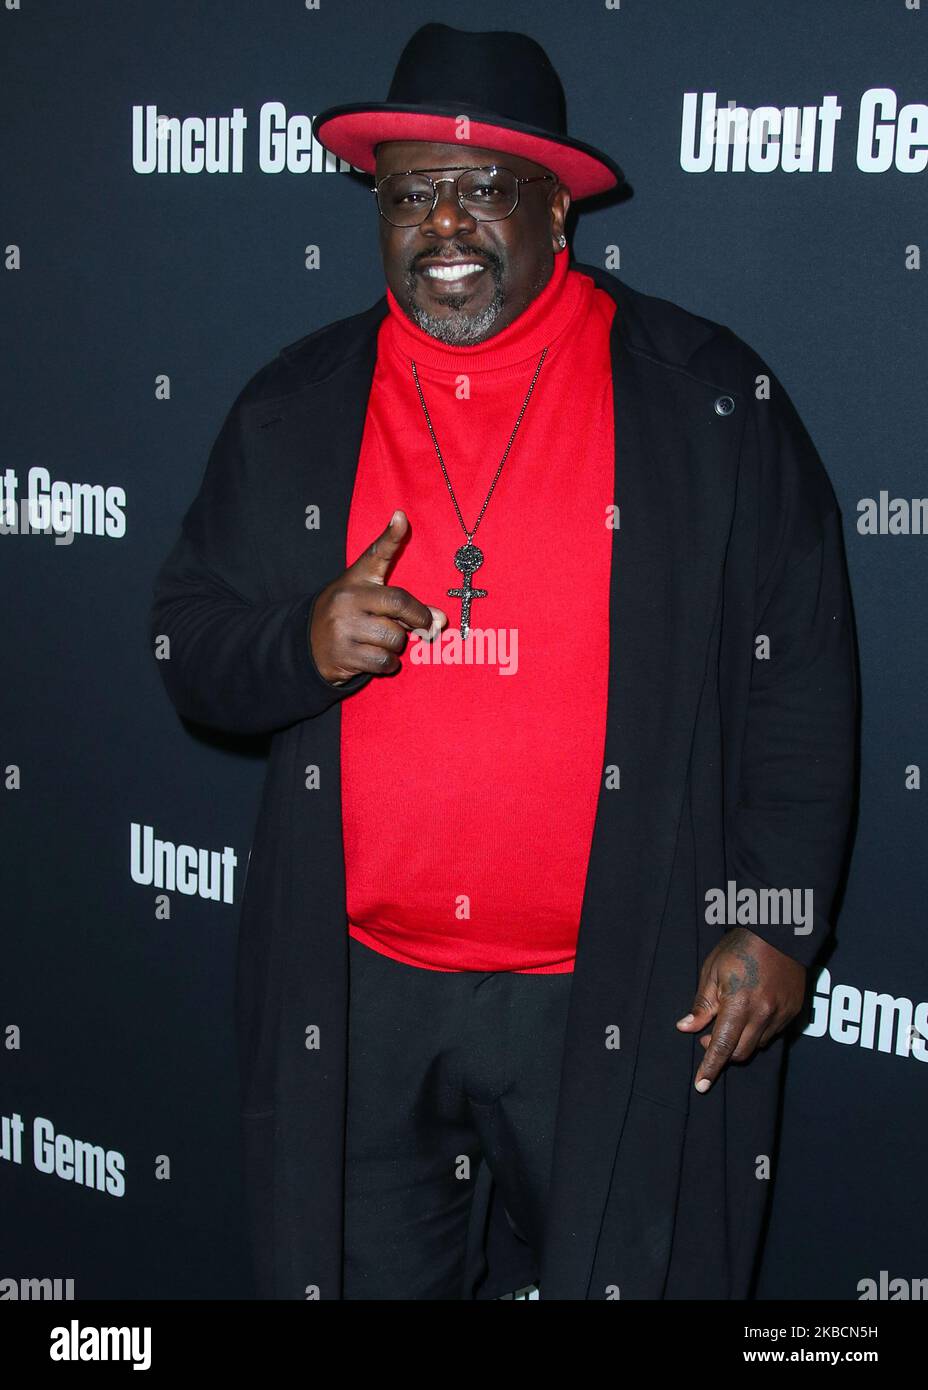 HOLLYWOOD, LOS ANGELES, CALIFORNIA, USA - DECEMBER 11: Actor Cedric the Entertainer arrives at the Los Angeles Premiere Of A24's 'Uncut Gems' held at the ArcLight Cinerama Dome on December 11, 2019 in Hollywood, Los Angeles, California, United States. (Photo by Xavier Collin/Image Press Agency/NurPhoto) Stock Photo